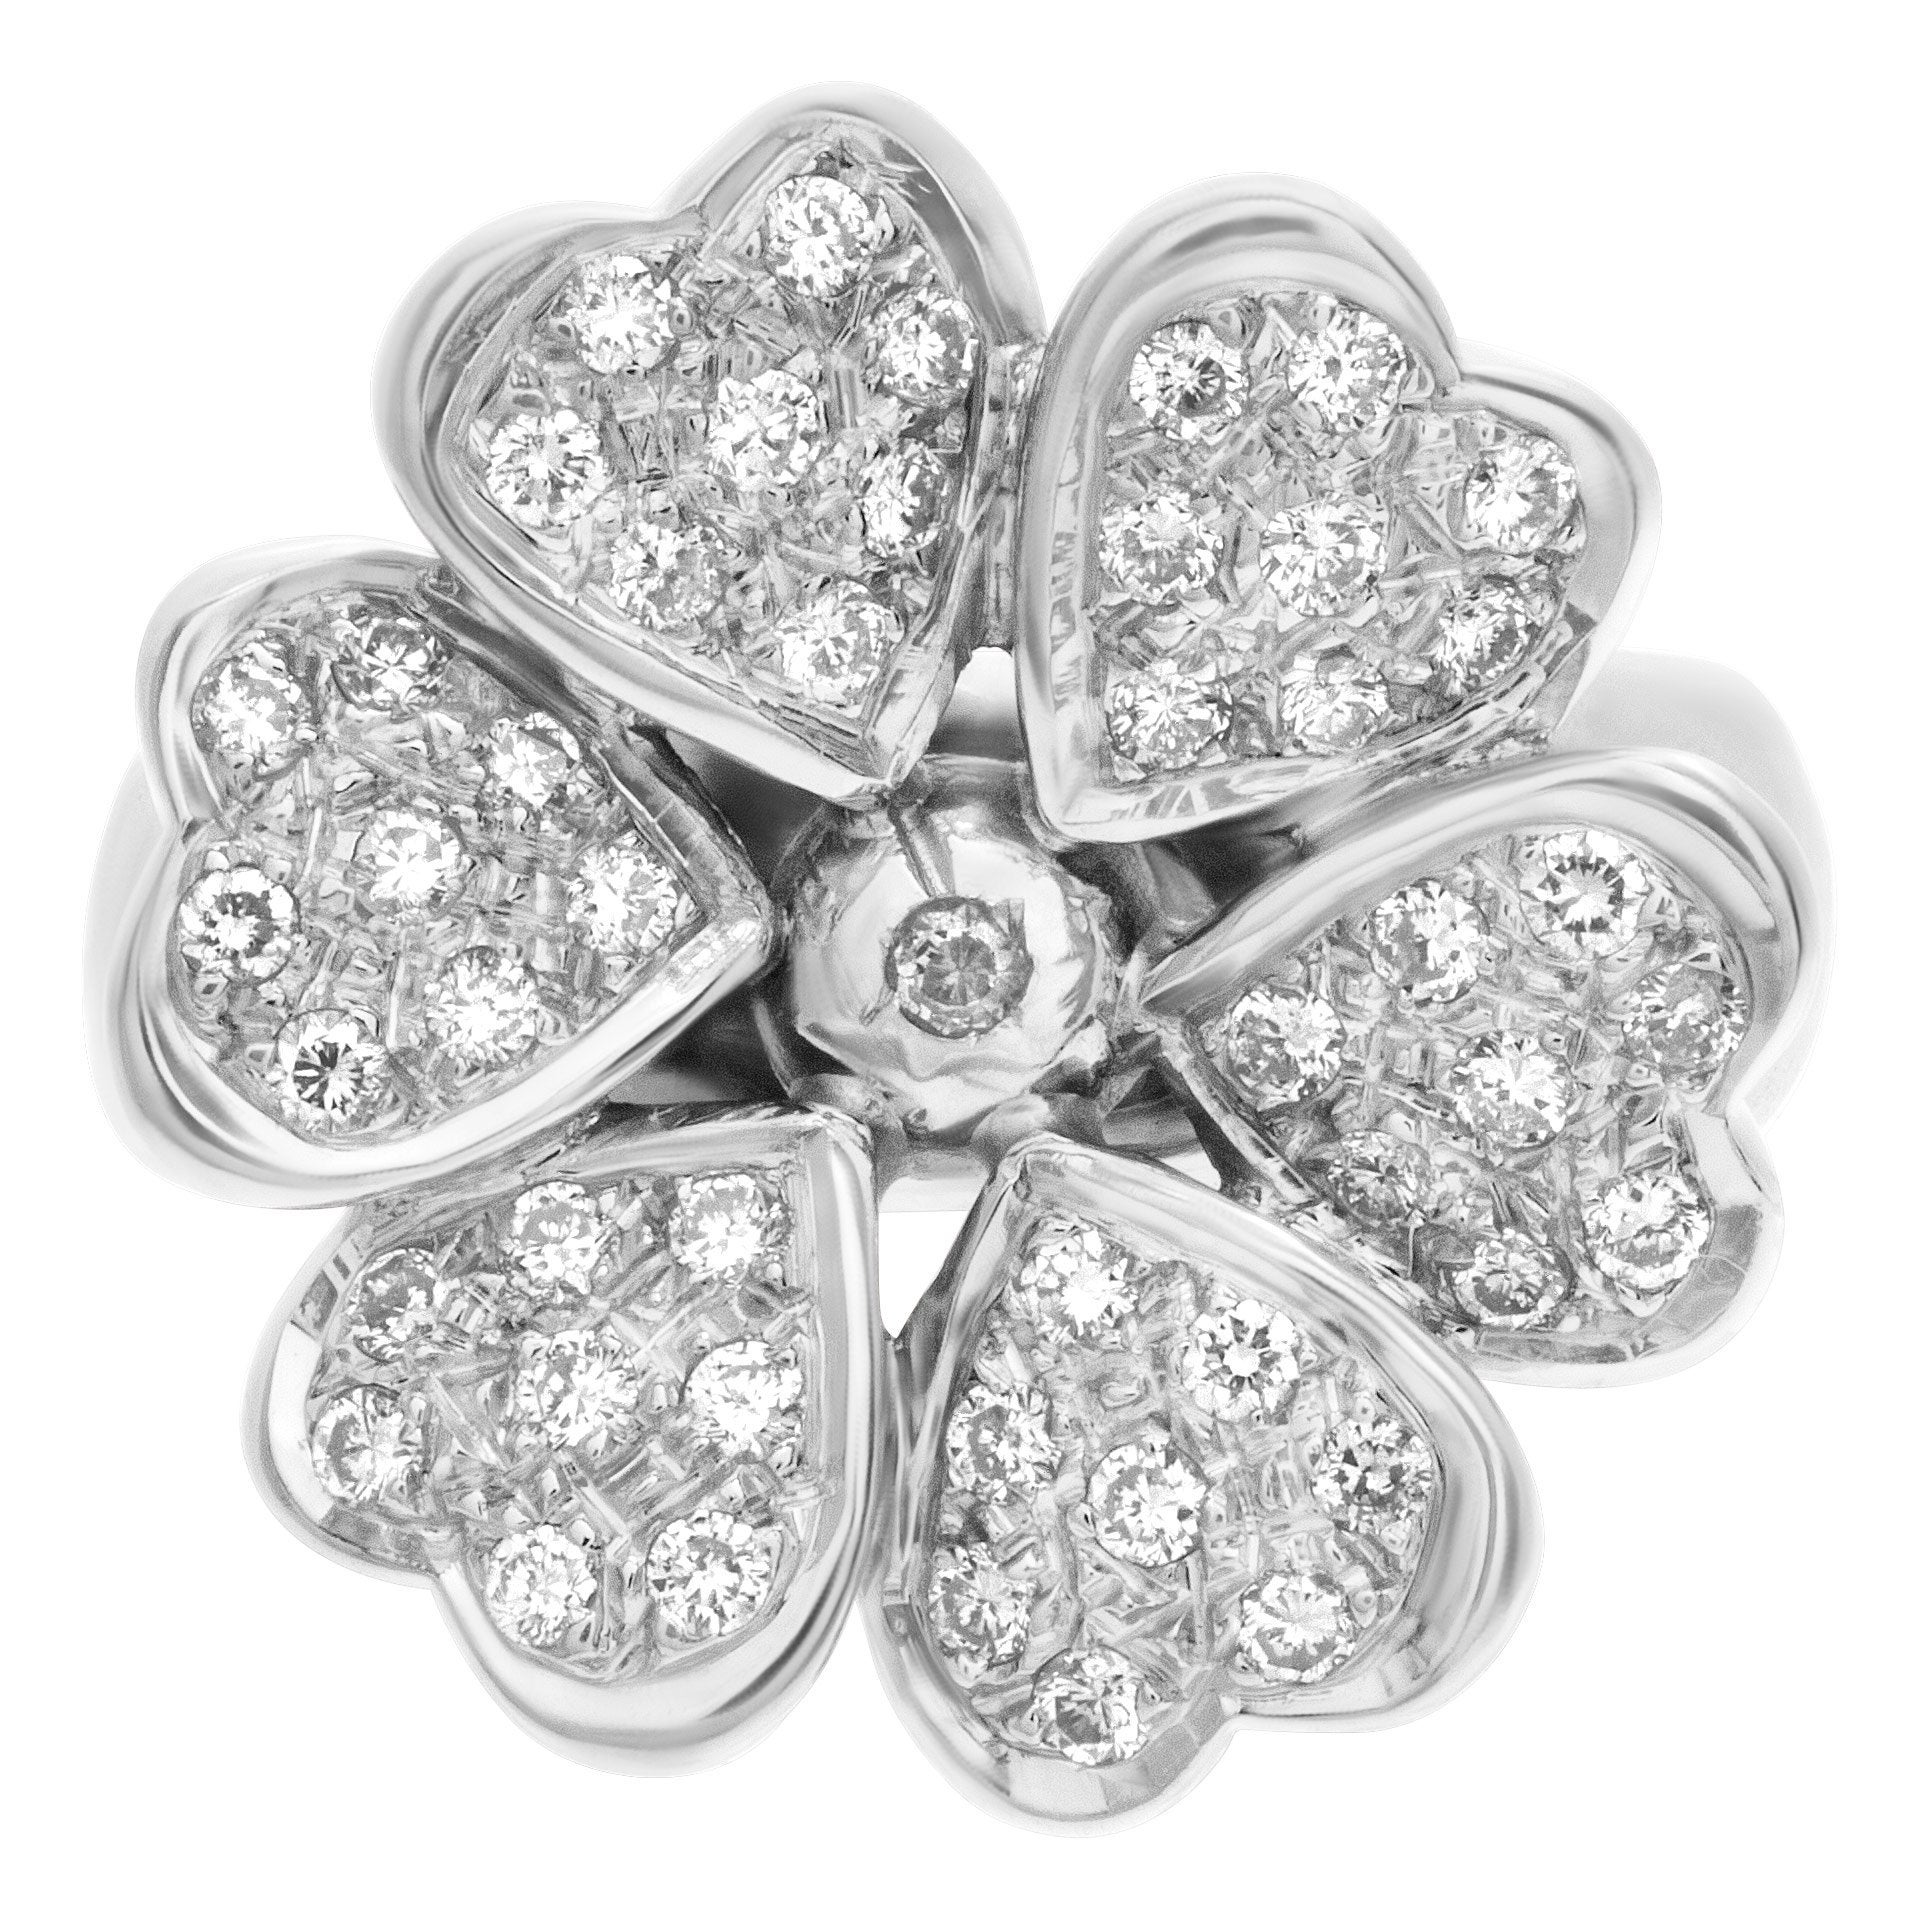 Diamond Flower Ring with 0.60 Carat in G-H Color, VS Clarity Diamonds Set in 18k For Sale